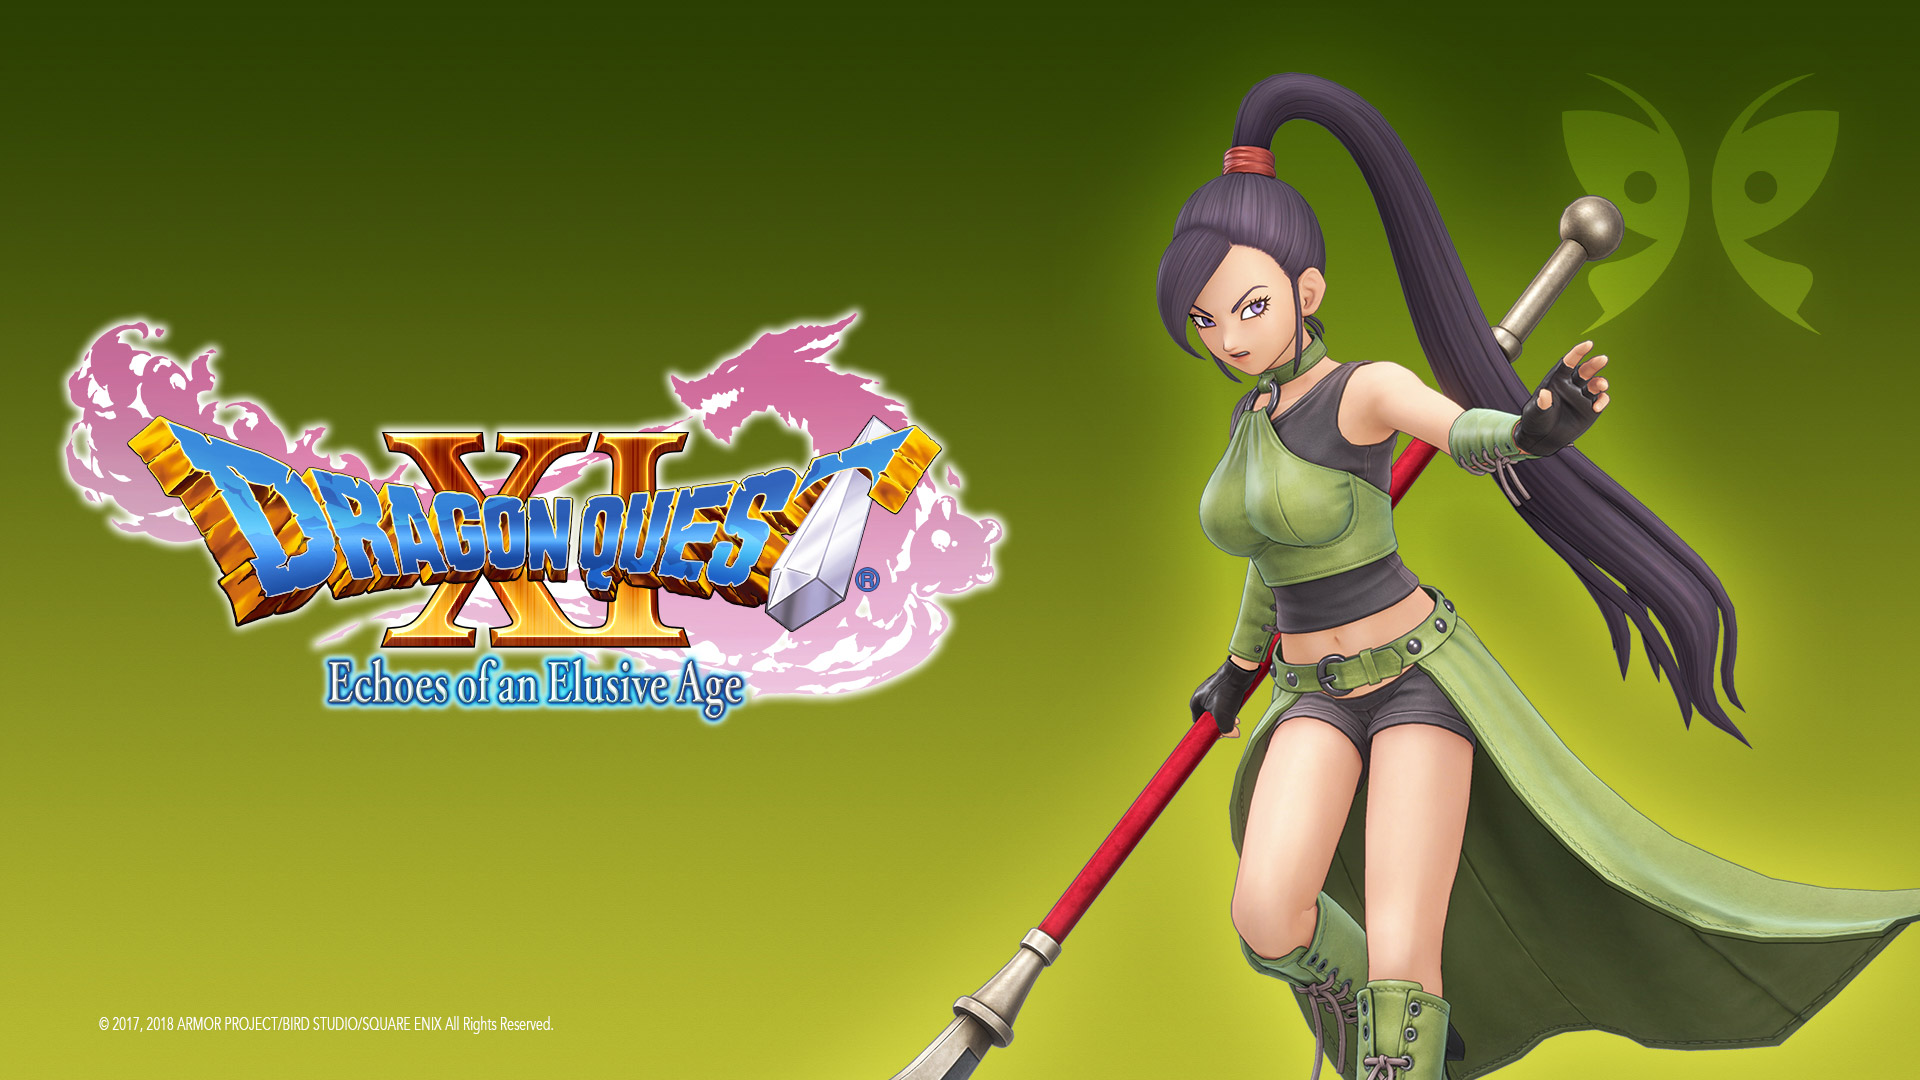 Download Dragon Quest Xi Echoes Of An Elusive Age Wallpaper 09 Jade Wallpapers Ethereal Games